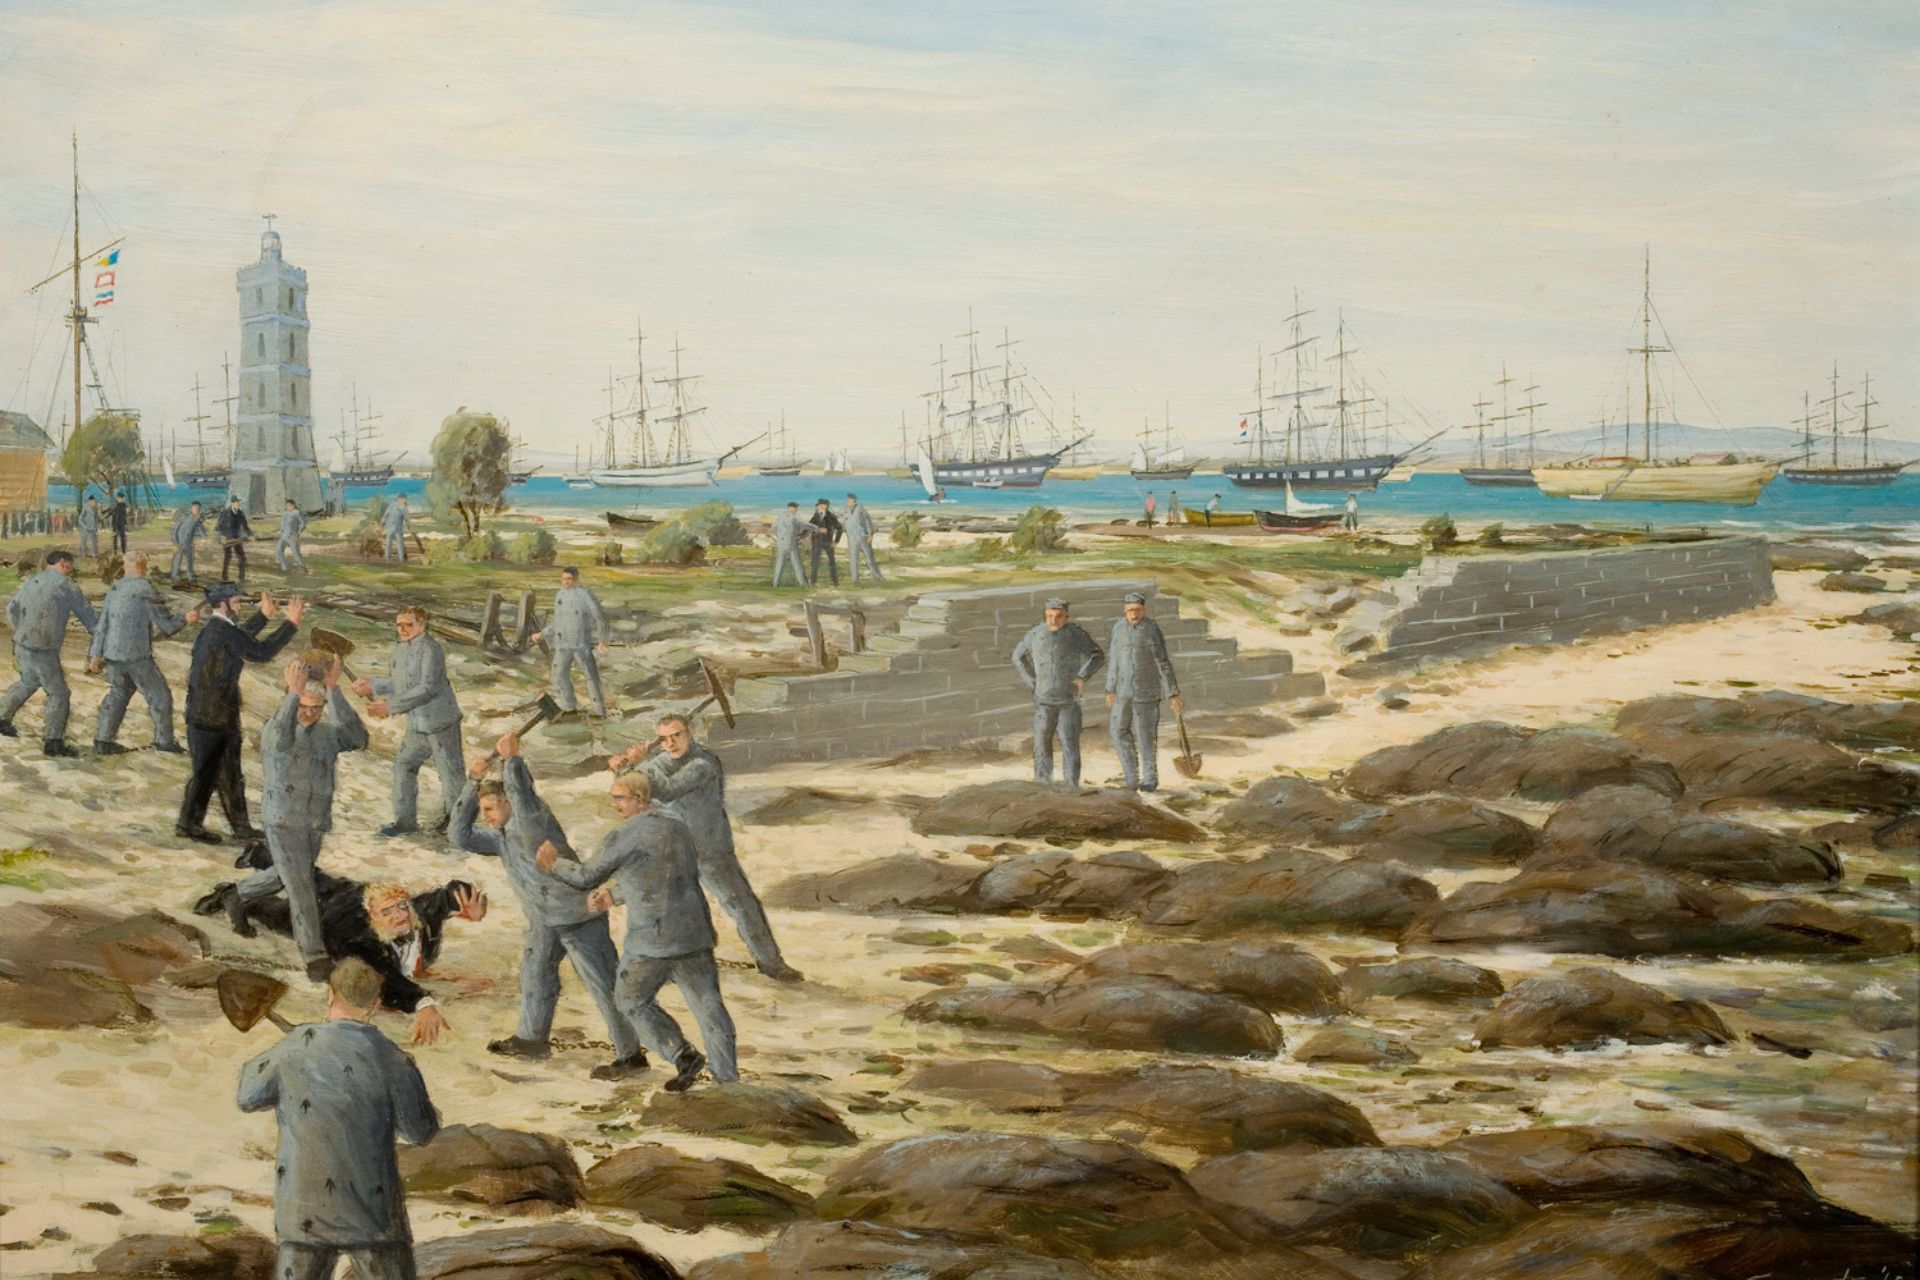 The attack on Inspector-General John Price by convicts at Point Gellibrand, 26th March, 1857